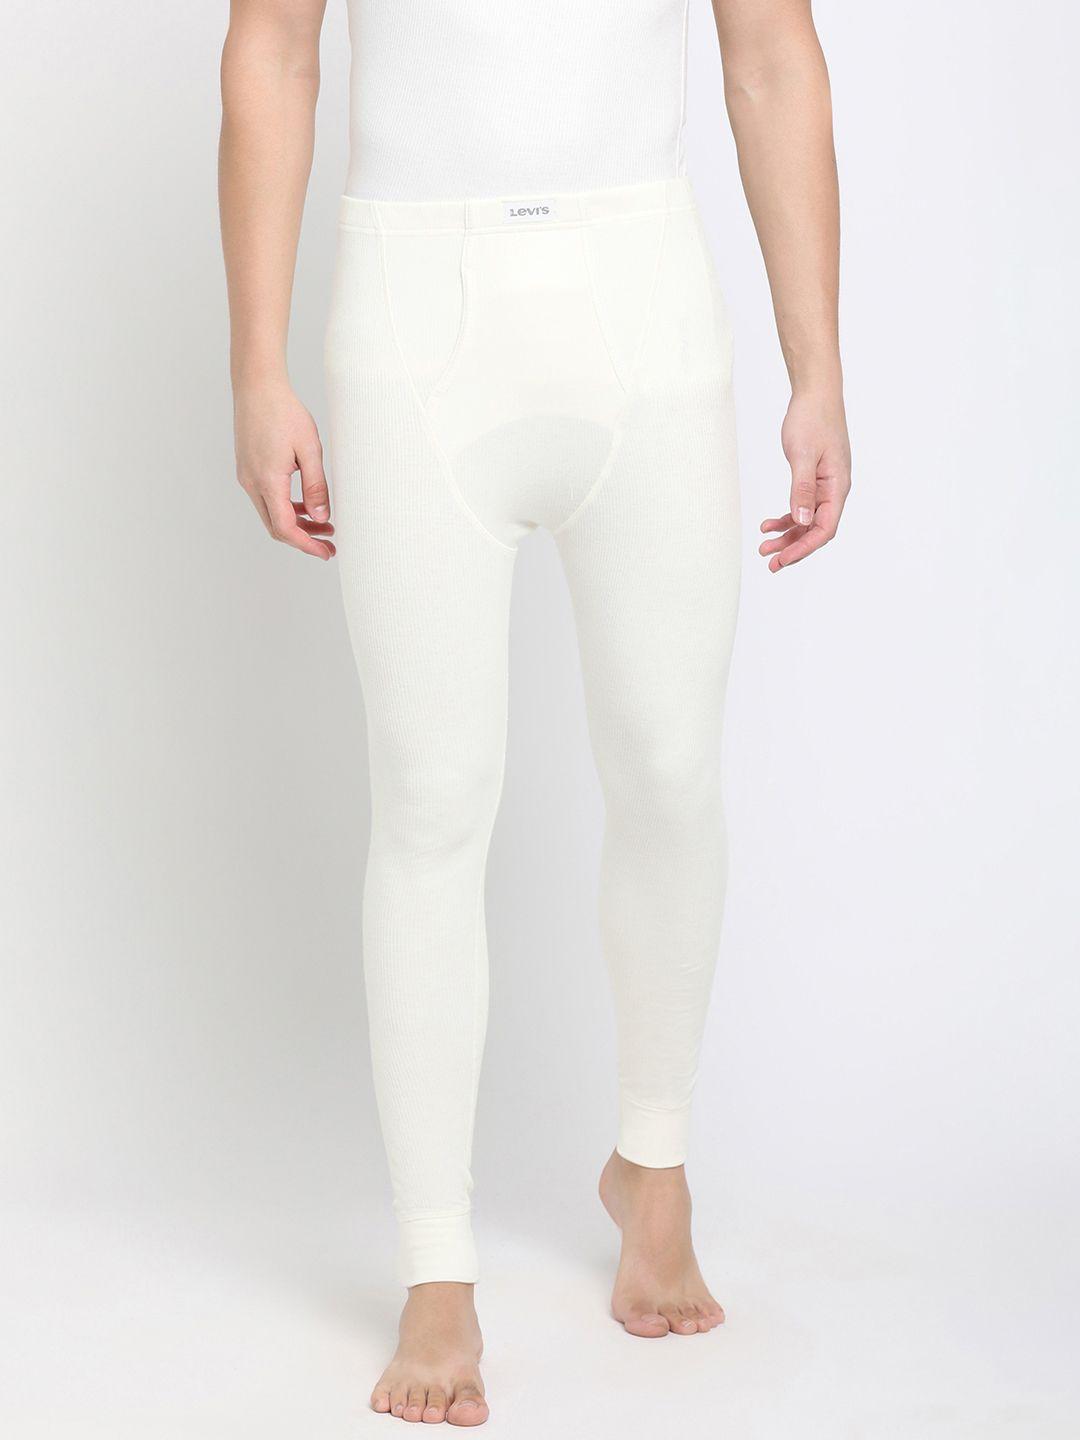 levis-men-off-white-solid-thermal-bottoms